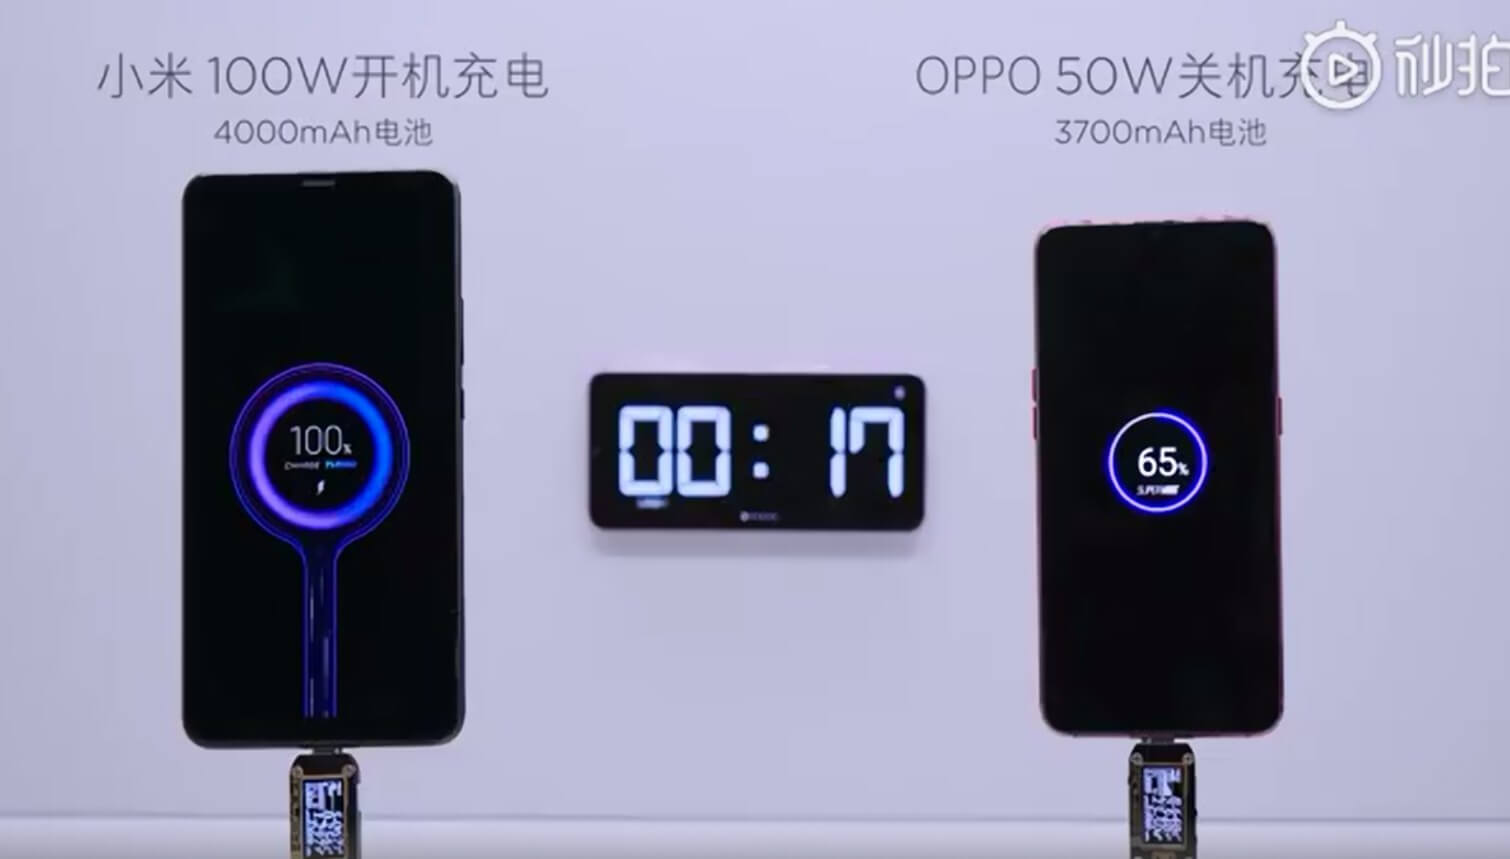 Xiaomi's 100W charger can juice a battery from zero to 100% in 17 minutes